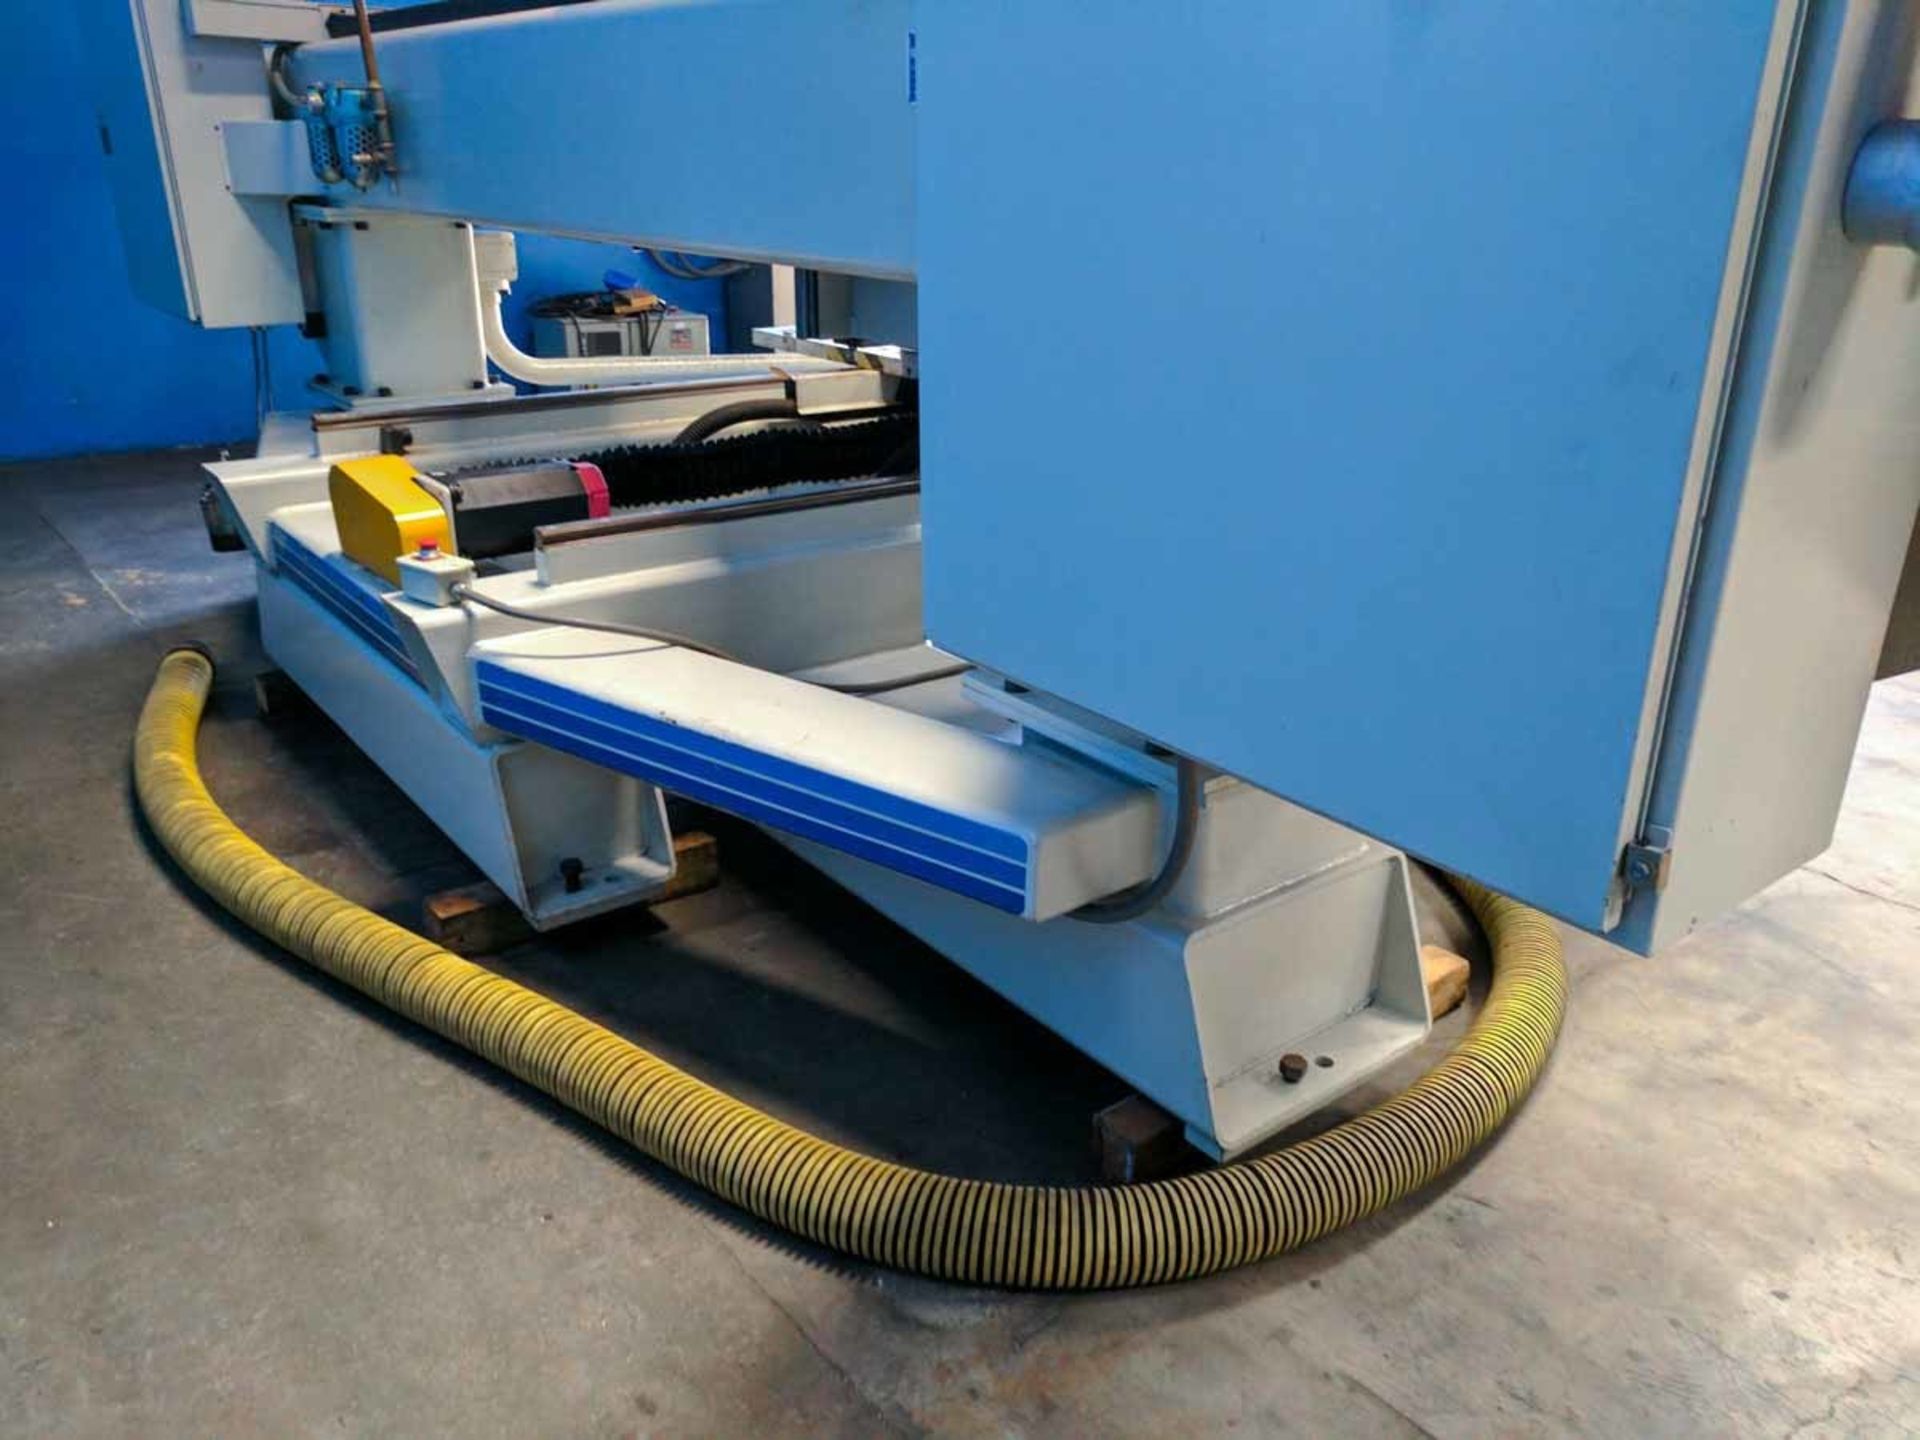 Komo VR805Q Fanuc CNC Metal Router 3 Axis 4 Spindle 96" x 60" Sheet Size - Located In: Huntington - Image 10 of 25